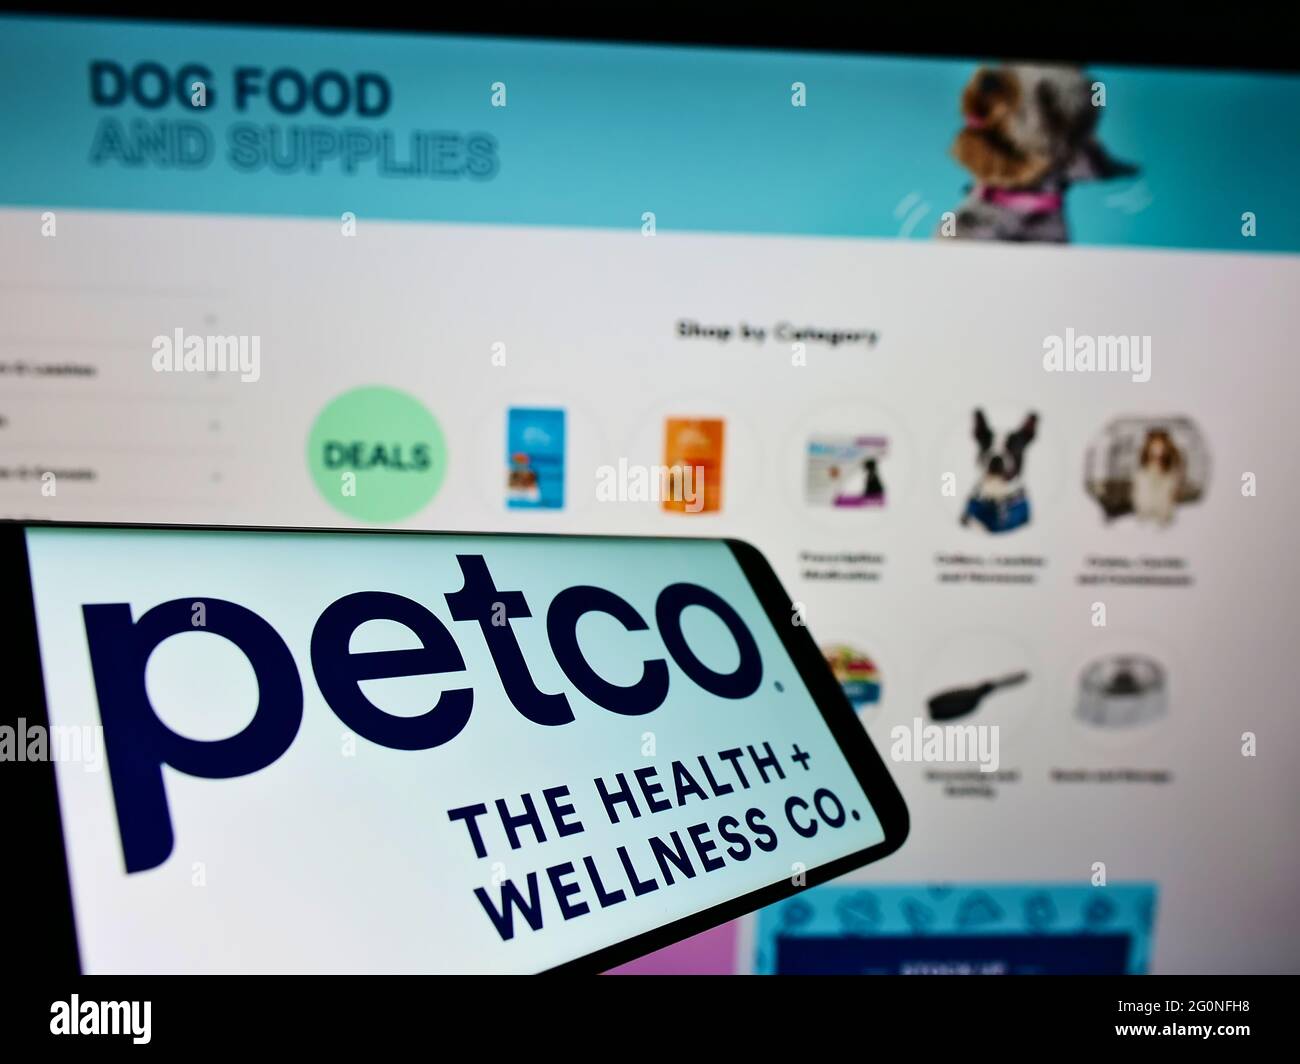 Cellphone with logo of American retailer Petco Health and Wellness Company on screen in front of website. Focus on center-right of phone display. Stock Photo